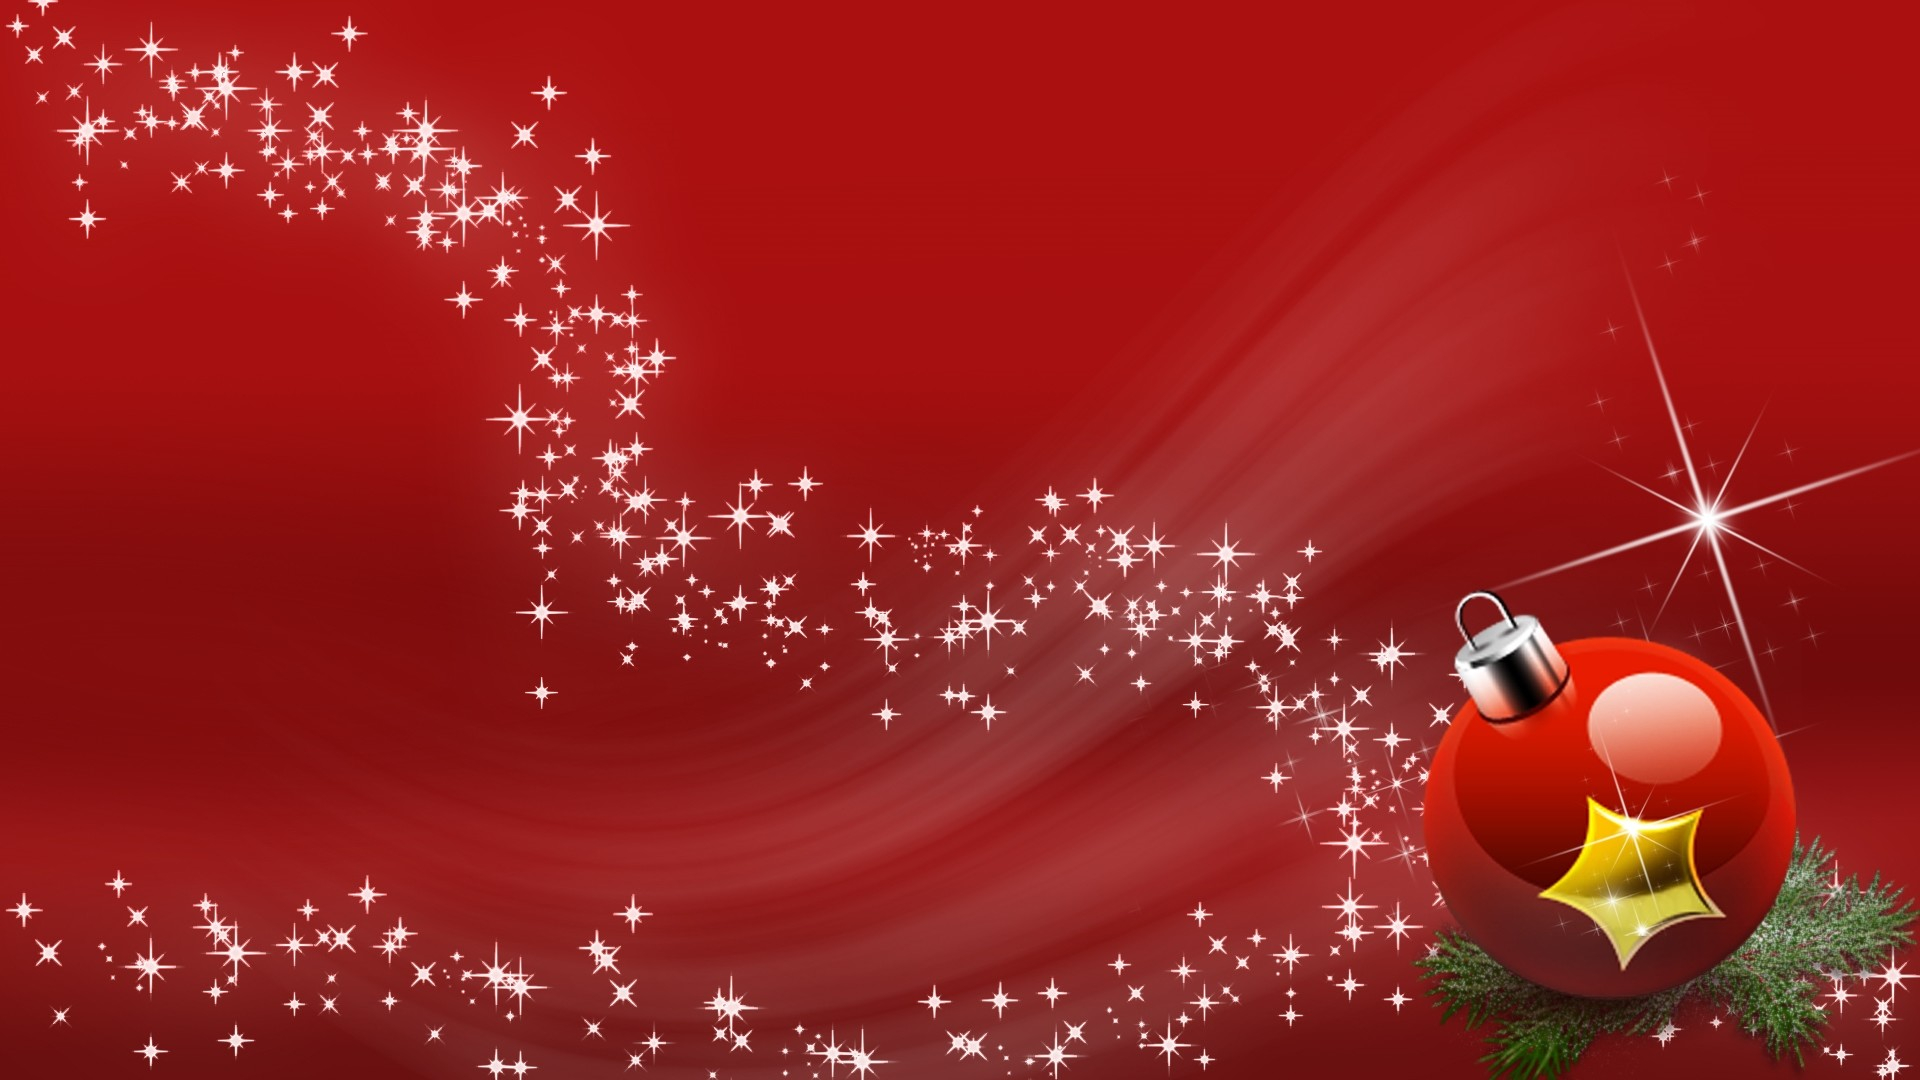 1920x1080 Red Christmas Backgrounds (48+ pictures